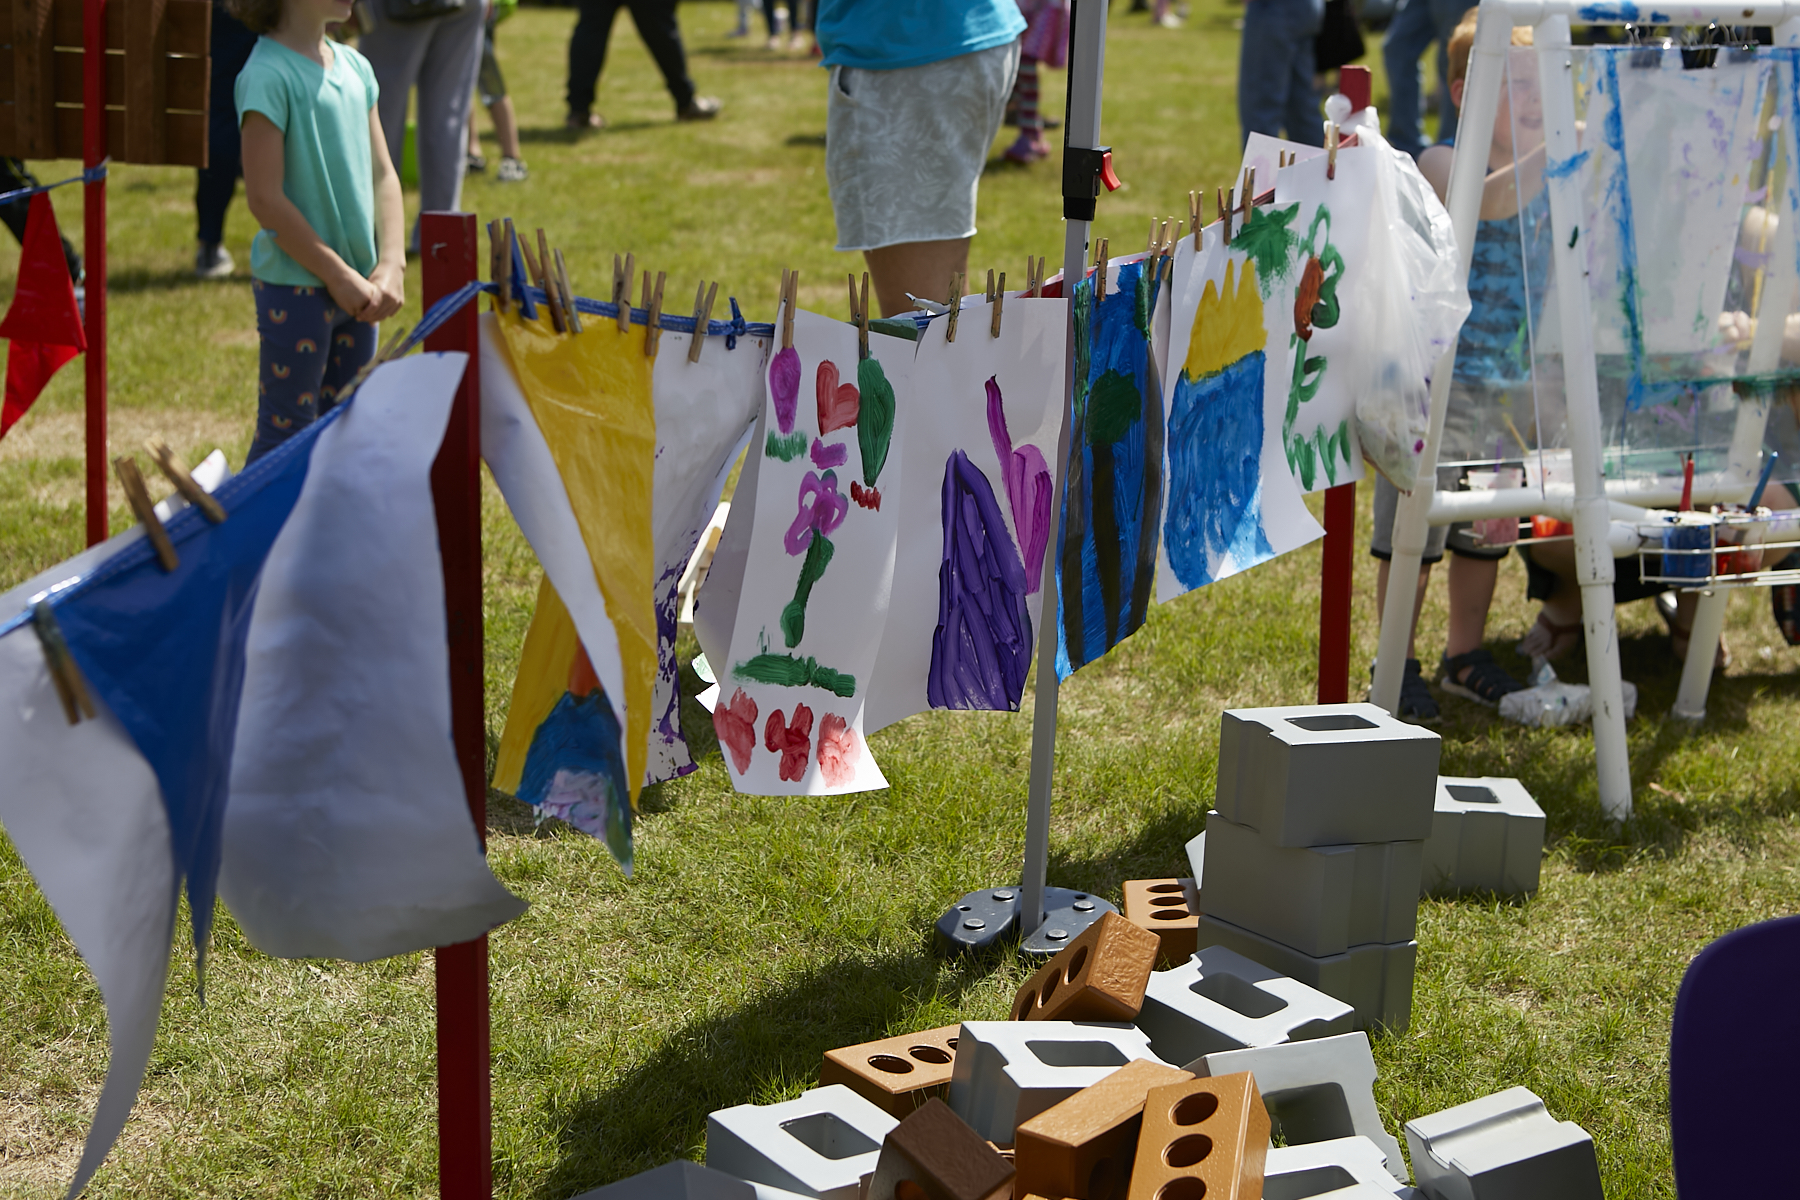 Children's works of arts hanging on a line to dry